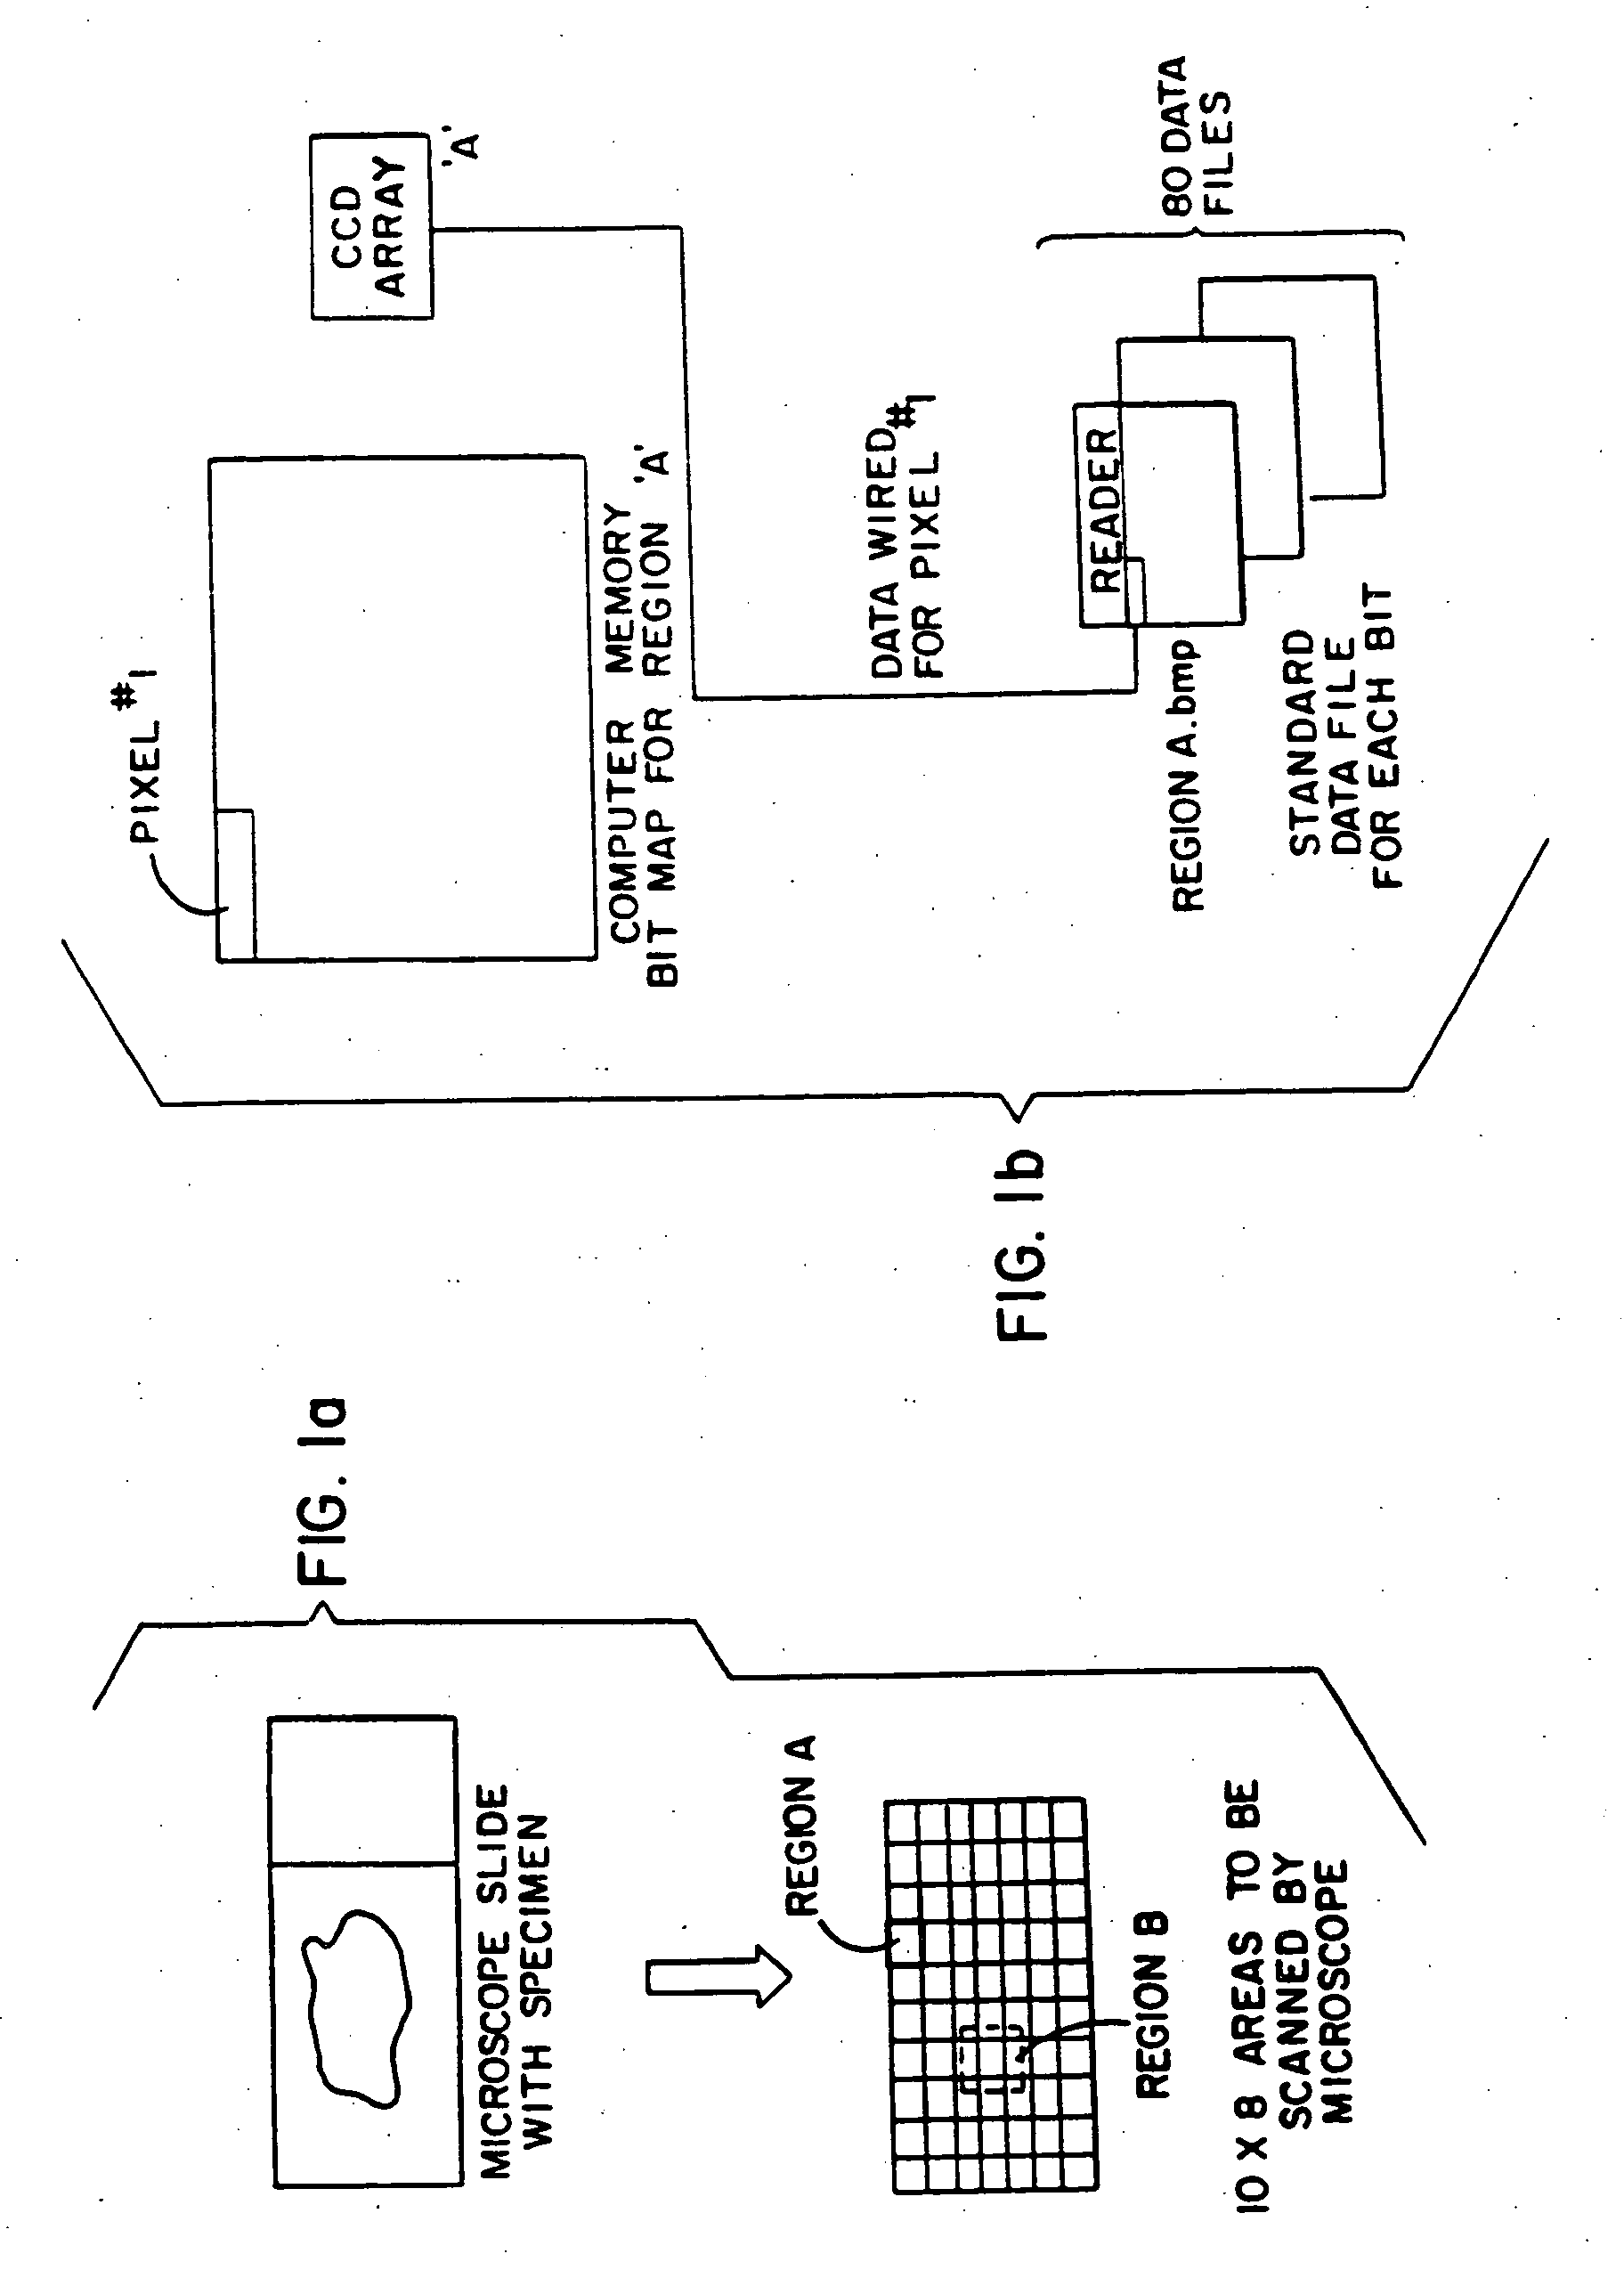 Method and apparatus for Internet, intranet, and local viewing of virtual microscope slides